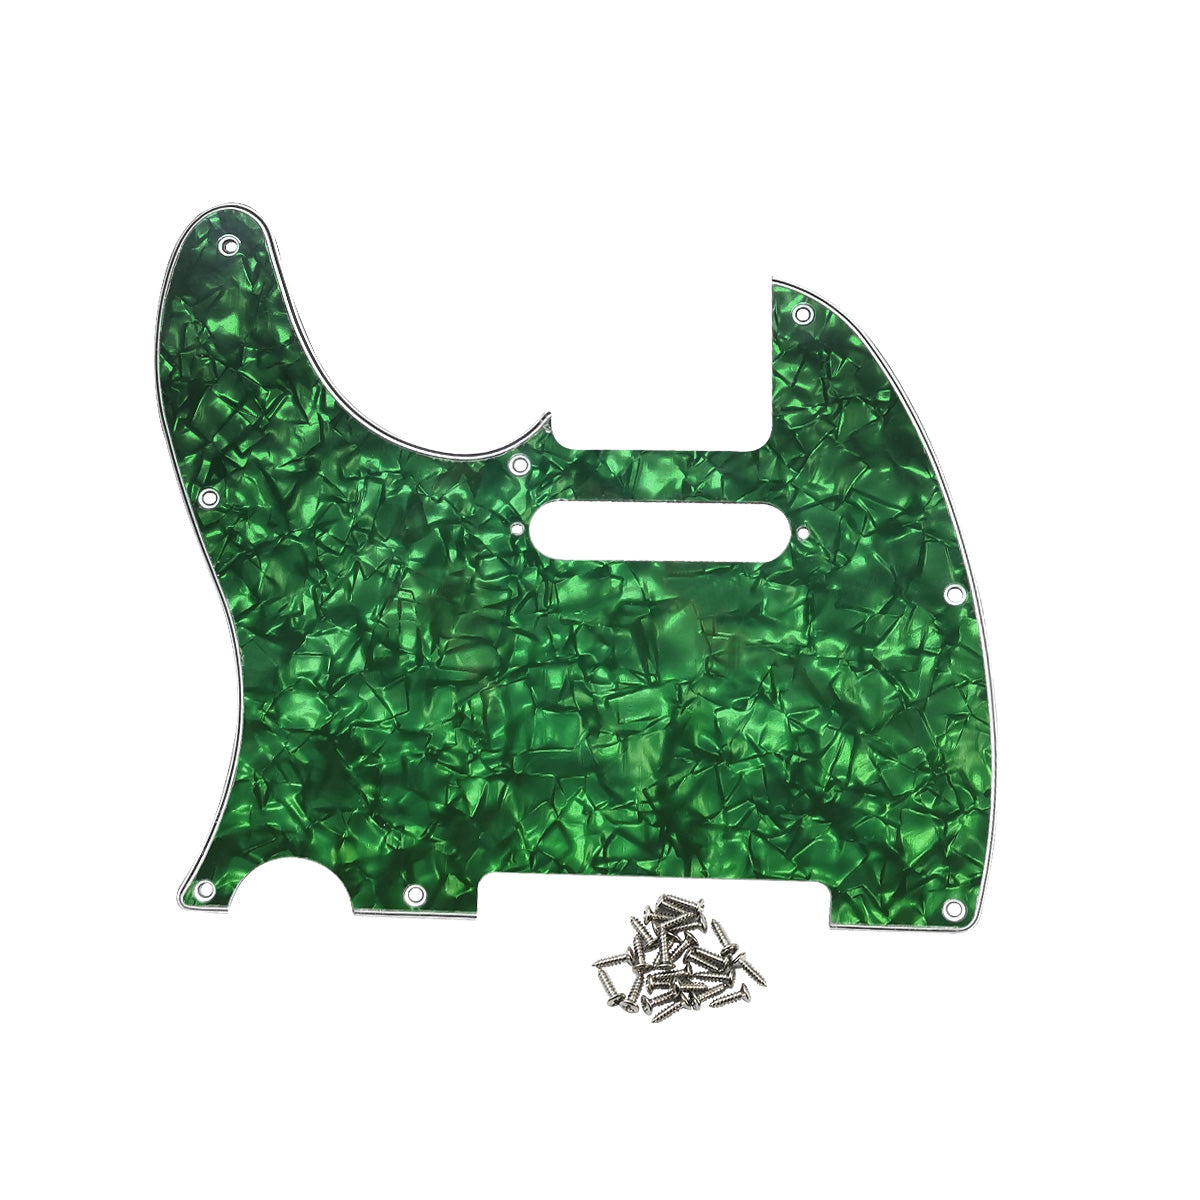 FLEOR Left Handed Guitar Pickguard with Screws for American/Mexican Standard FD Tele Guitar